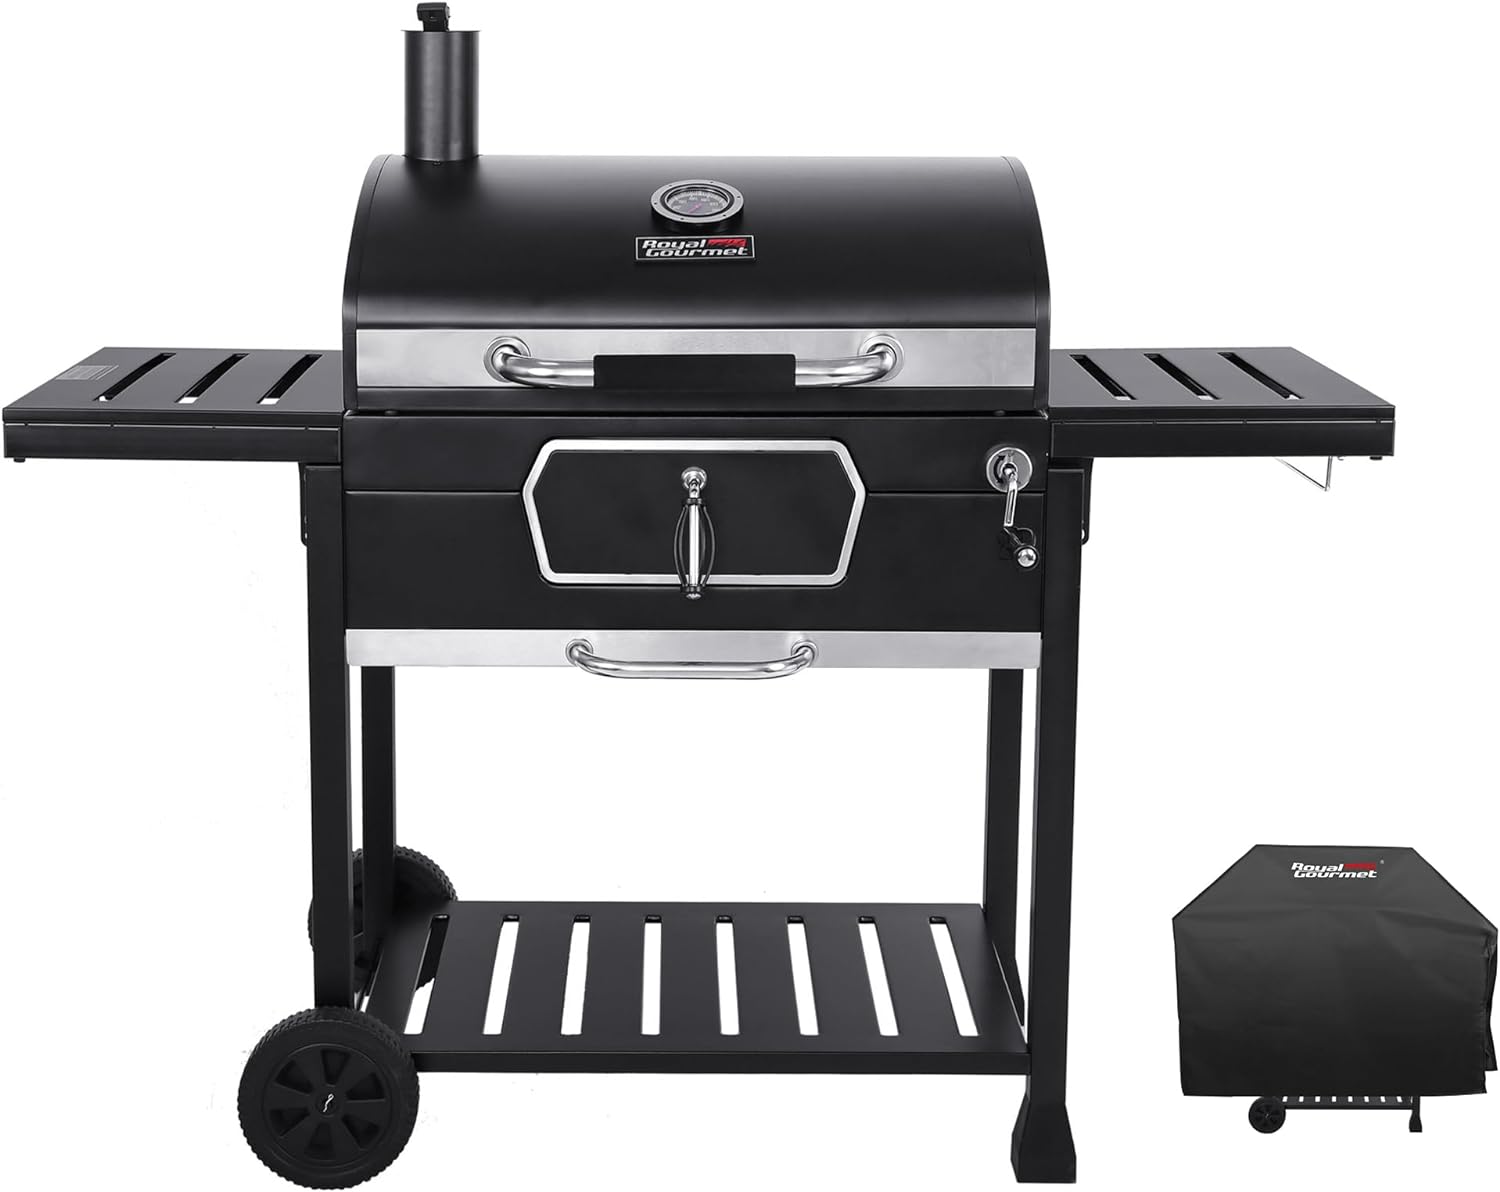 Royal Gourmet CD2030AC Deluxe 30-Inch Charcoal BBQ Grill with Cover, Barbecue Grill with Collapsible Side Tables for Outdoor Picnic Camping Patio Backyard Cooking, Black